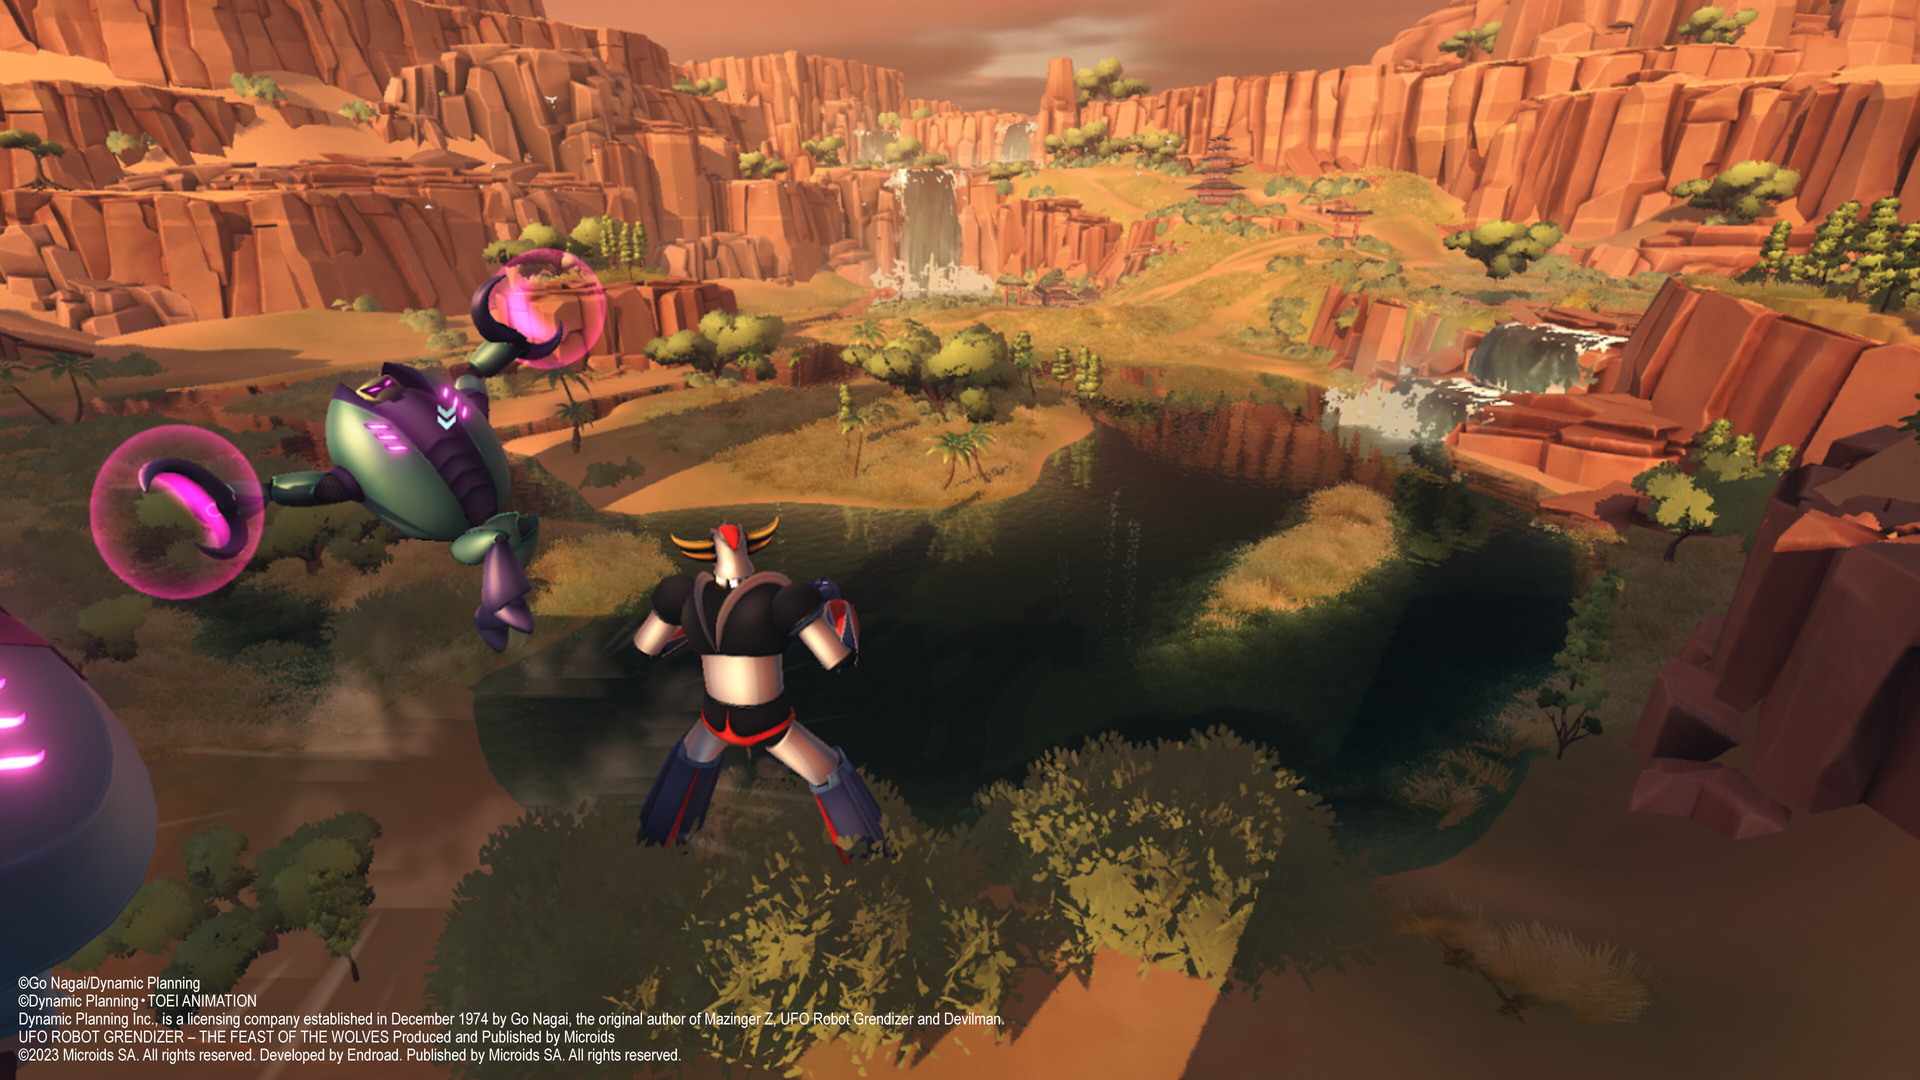 UFO Robot Grendizer: The Feast of the Wolves - screenshot 8